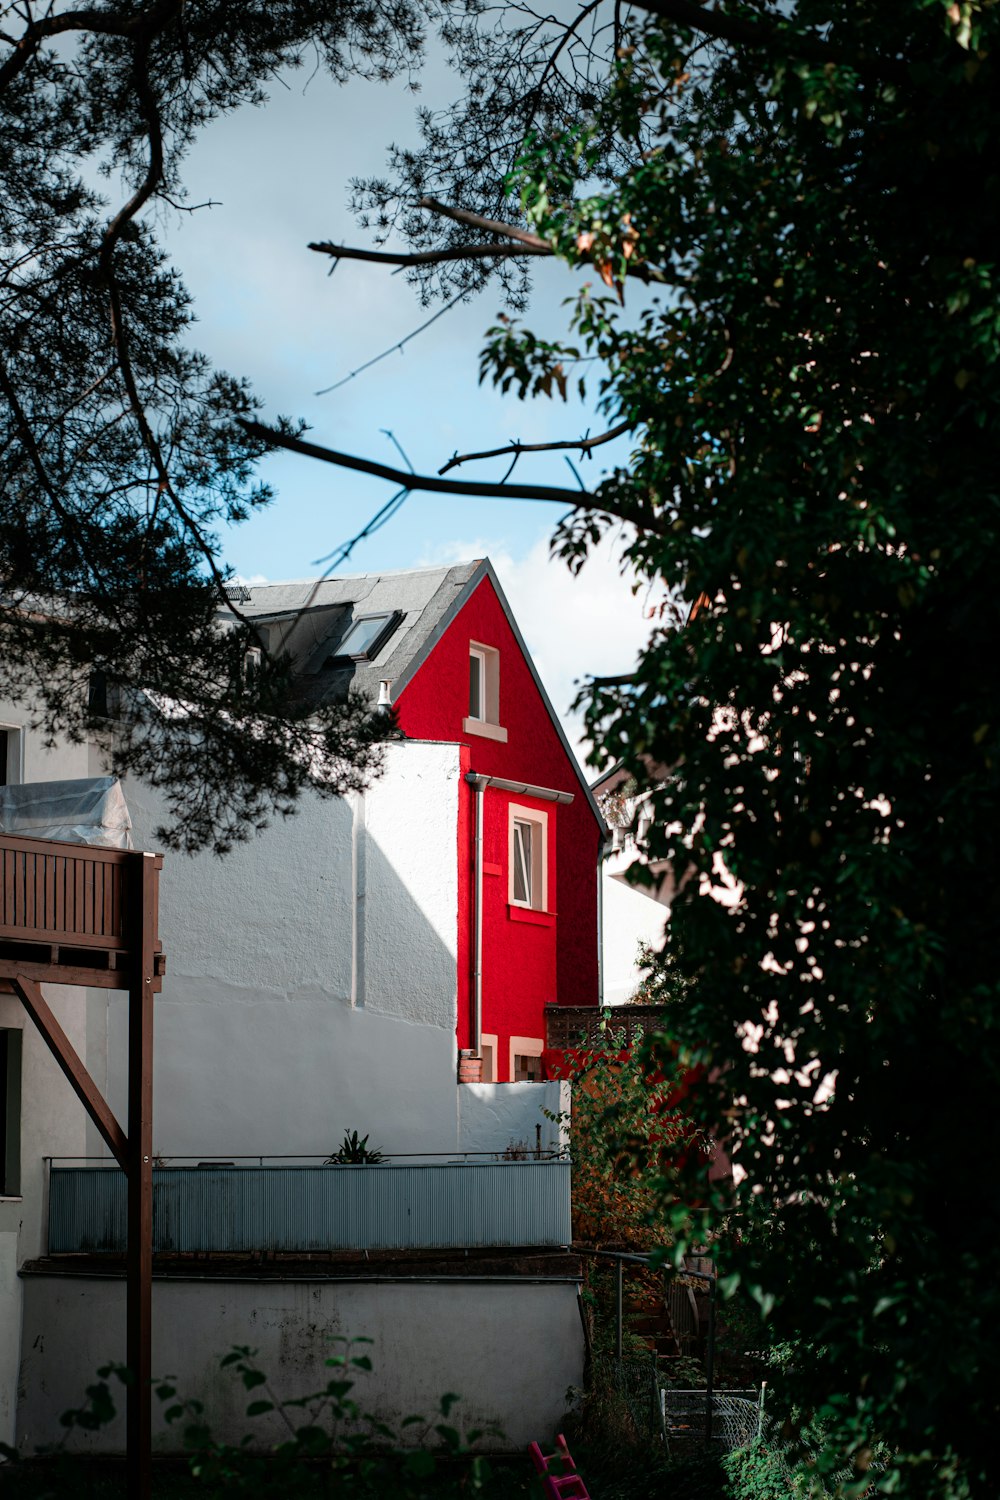 a house with a red roof and a red ladder